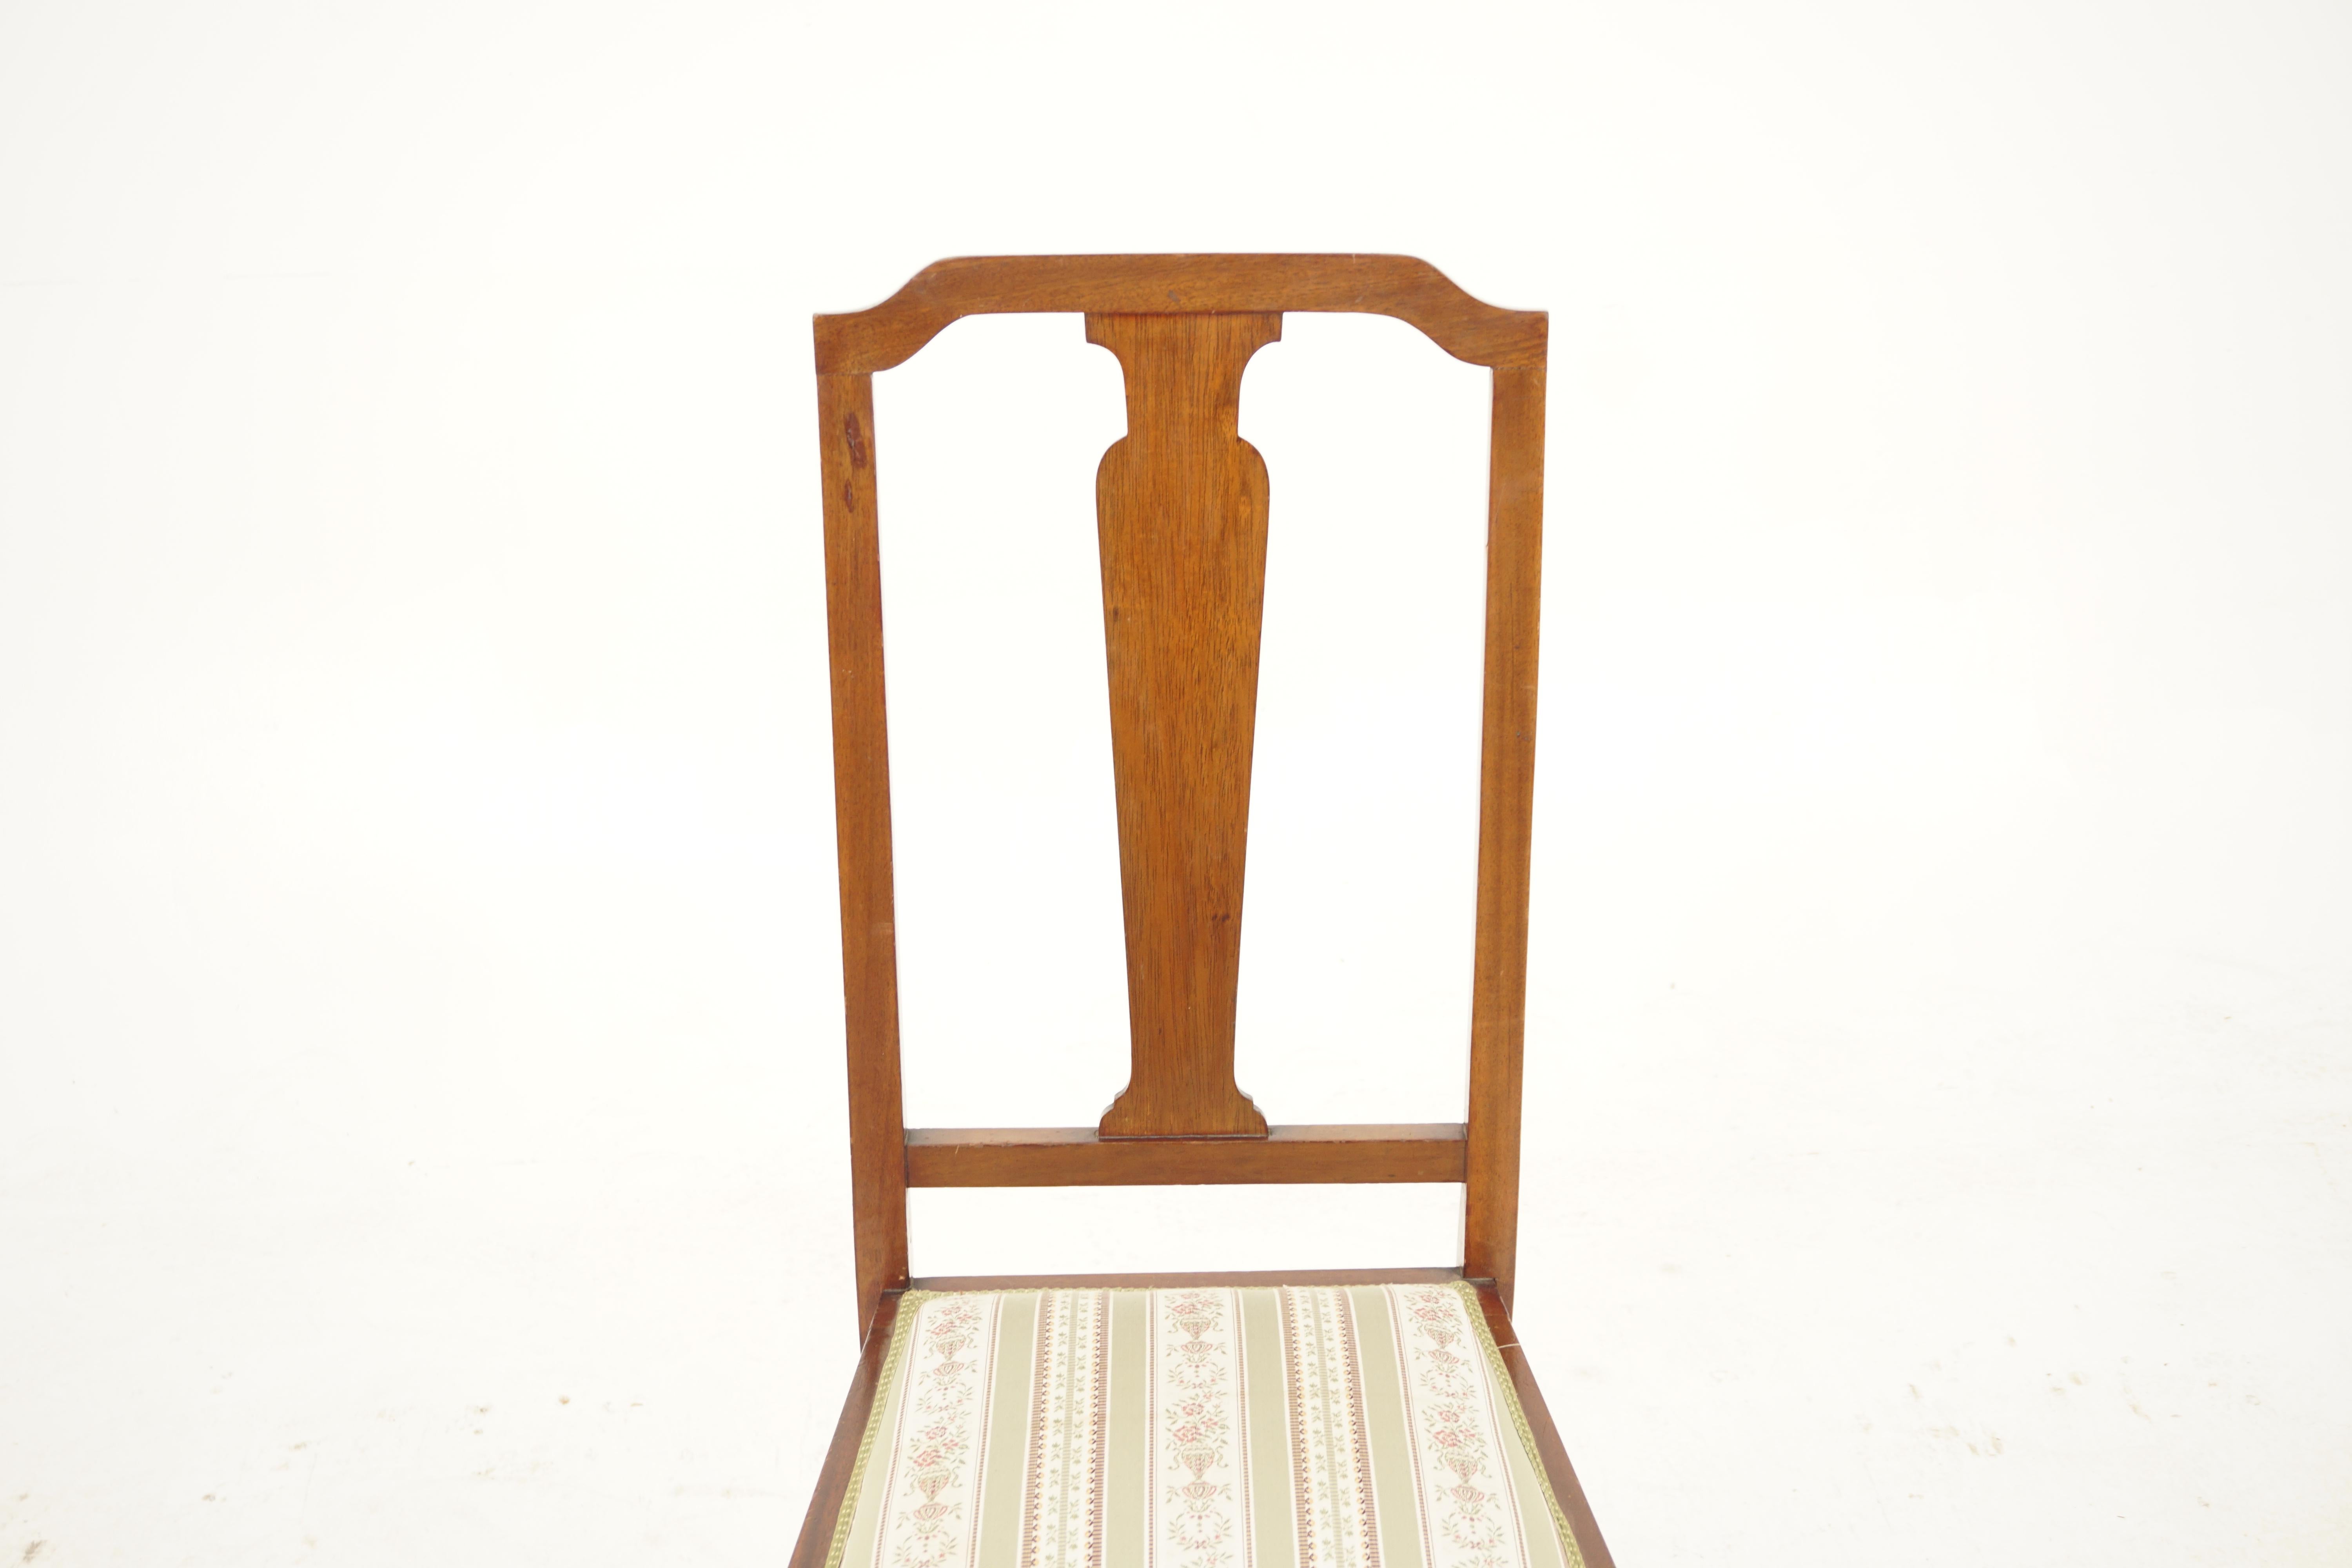 Scottish Pair of Edwardian Walnut Bedroom Chairs, Scotland 1910, H067 For Sale